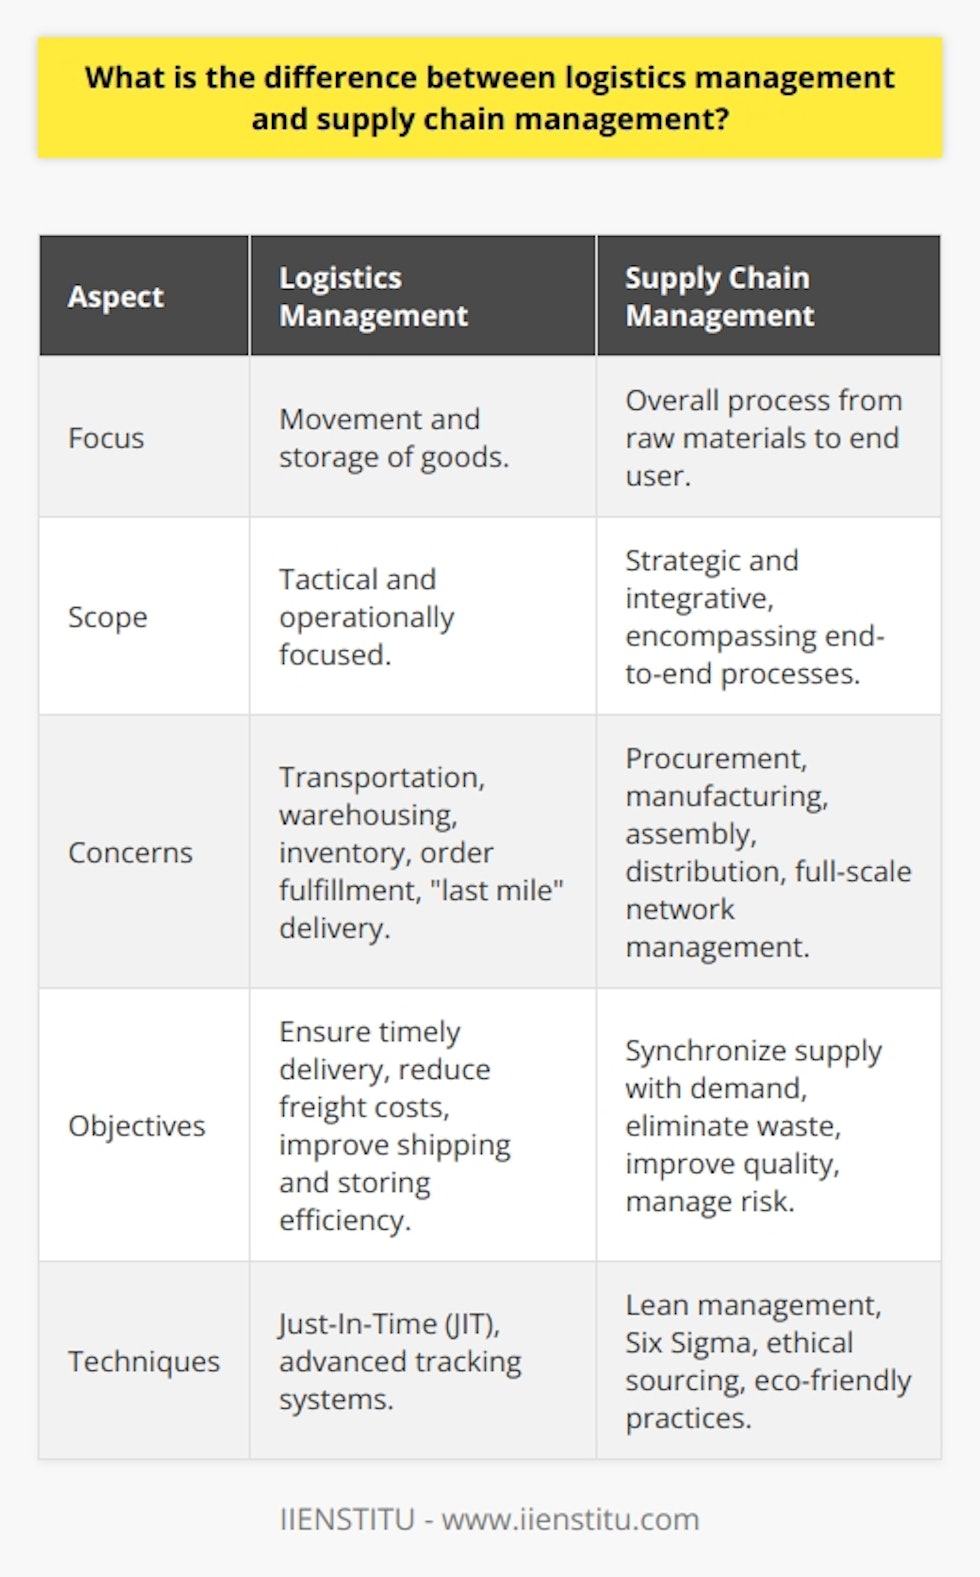 Logistics management and supply chain management are two critical facets of the operational strategies that facilitate the smooth flow of goods and services from producers to consumers. While the two terms are often used interchangeably in casual discussions, they represent different, albeit overlapping, domains within the broader context of organizational management.**Logistics Management**At its core, logistics management is focused on the tactical aspects of moving and storing goods. This includes detailed planning and execution in transportation, warehousing, inventory management, order fulfillment, and distribution. The aim of logistics management is to ensure that goods or services are available where and when they are needed, in the proper condition and at an acceptable cost. It is particularly concerned with the last mile delivery—the final step of the process, which is getting the product directly to the end-user.Logistics management is also geared towards optimizing shipping and storing operations, reducing freight costs, improving delivery times, and managing inventory levels effectively to reduce holding costs. By employing techniques such as Just-In-Time (JIT) delivery and advanced tracking systems, logistics managers work to streamline operations and mitigate the potential for overstocking or stockouts.**Supply Chain Management**Supply chain management (SCM), by contrast, takes a bird's-eye view of the entire process through which a product or service passes—from raw material extraction through production and ultimately to the end user. This entails close coordination not only of logistics but also of supply chain partners' activities, including procurement of materials, manufacturing, assembly, and full-scale distribution networks.SCM seeks to develop a strategic and integrative approach that ties together all the interlinking parts of the supply chain to create a seamless and responsive network. It involves synchronizing the supply with the demand, designing and managing the entire supply chain network, developing relationships with suppliers and partners, and continually evaluating and managing risk throughout the supply chain.Through methodologies like lean management and Six Sigma, SCM professionals aim to create value-added processes that eliminate waste and redundancy, improve quality, and increase the speed of delivery. Furthermore, active supply chain management can achieve greater sustainability objectives by focusing on ethical sourcing and eco-friendly logistics practices.*Key Differences Highlighted*The distinction between logistics and supply chain management is primarily in scope and depth of control. Logistics management is the more narrowly focused discipline, concerned chiefly with the movement and storage aspects that take place toward the end of the supply chain. Supply chain management, conversely, takes a holistic approach, incorporating the full spectrum of activities and processes necessary to deliver a product from the supplier to the customer.In conclusion, both logistics management and supply chain management are pivotal elements for any organization involved in the production and distribution of goods. Logistics is a crucial subset of SCM—while logistics aims for efficiency in the delivery process, SCM strives for optimization across all stages of the product's lifecycle. The success of one directly influences the effectiveness of the other. Organizations, such as IIENSTITU, offer courses and educational resources that delve into these subjects, providing a better understanding and skillset for professionals looking to navigate the complexities of these disciplines. Integrating sound logistics management into an overarching supply chain strategy is essential for companies that seek to maintain a streamlined, responsive, and customer-focused operation.